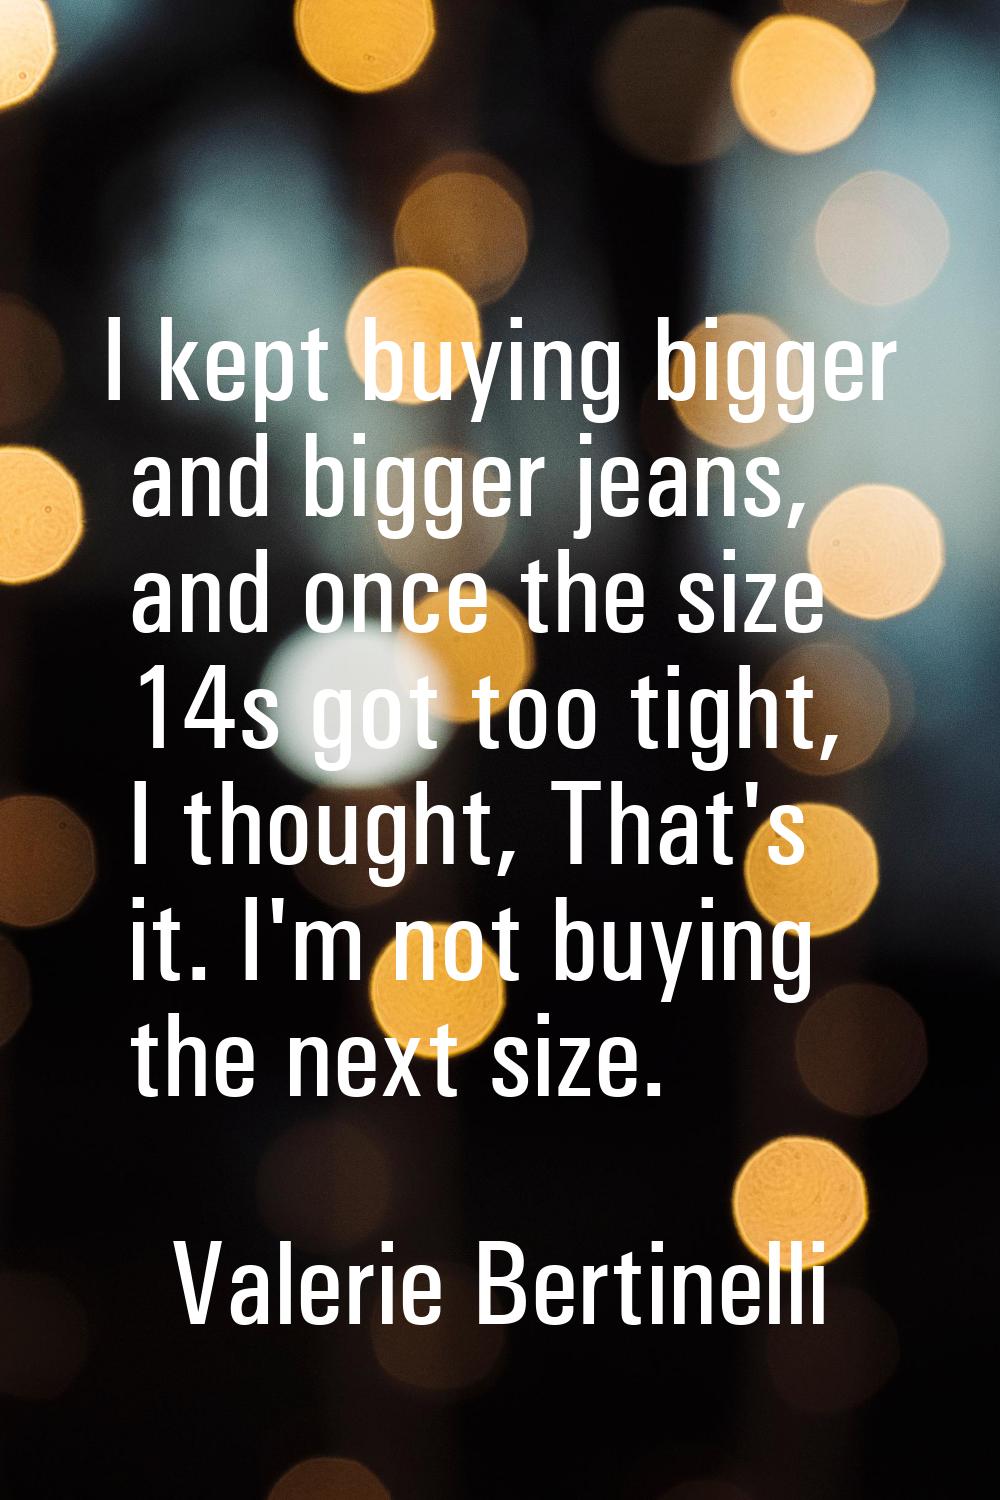 I kept buying bigger and bigger jeans, and once the size 14s got too tight, I thought, That's it. I